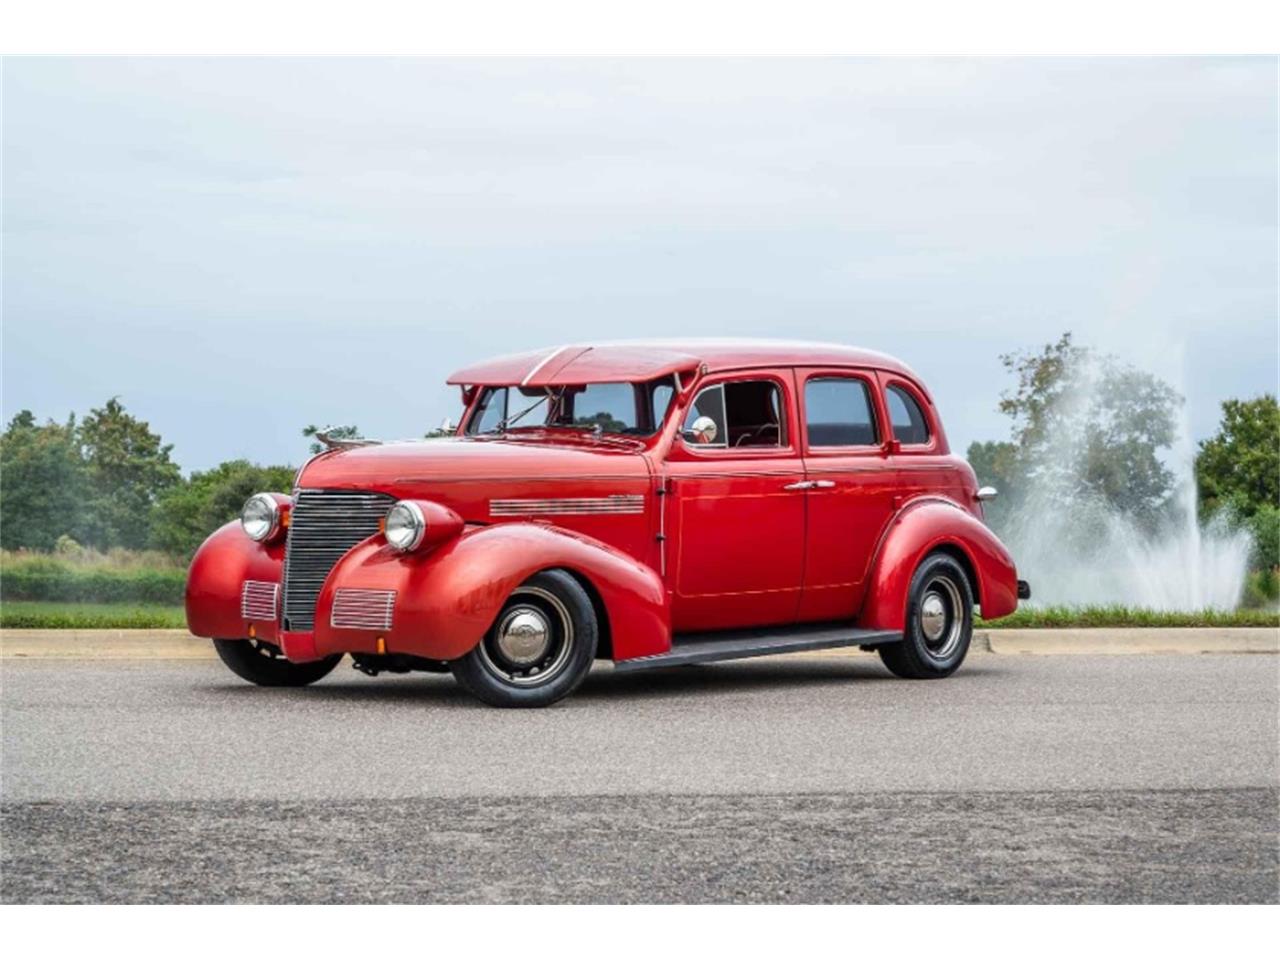 For Sale: 1939 Chevrolet Business Coupe in Hobart, Indiana for sale in Hobart, IN